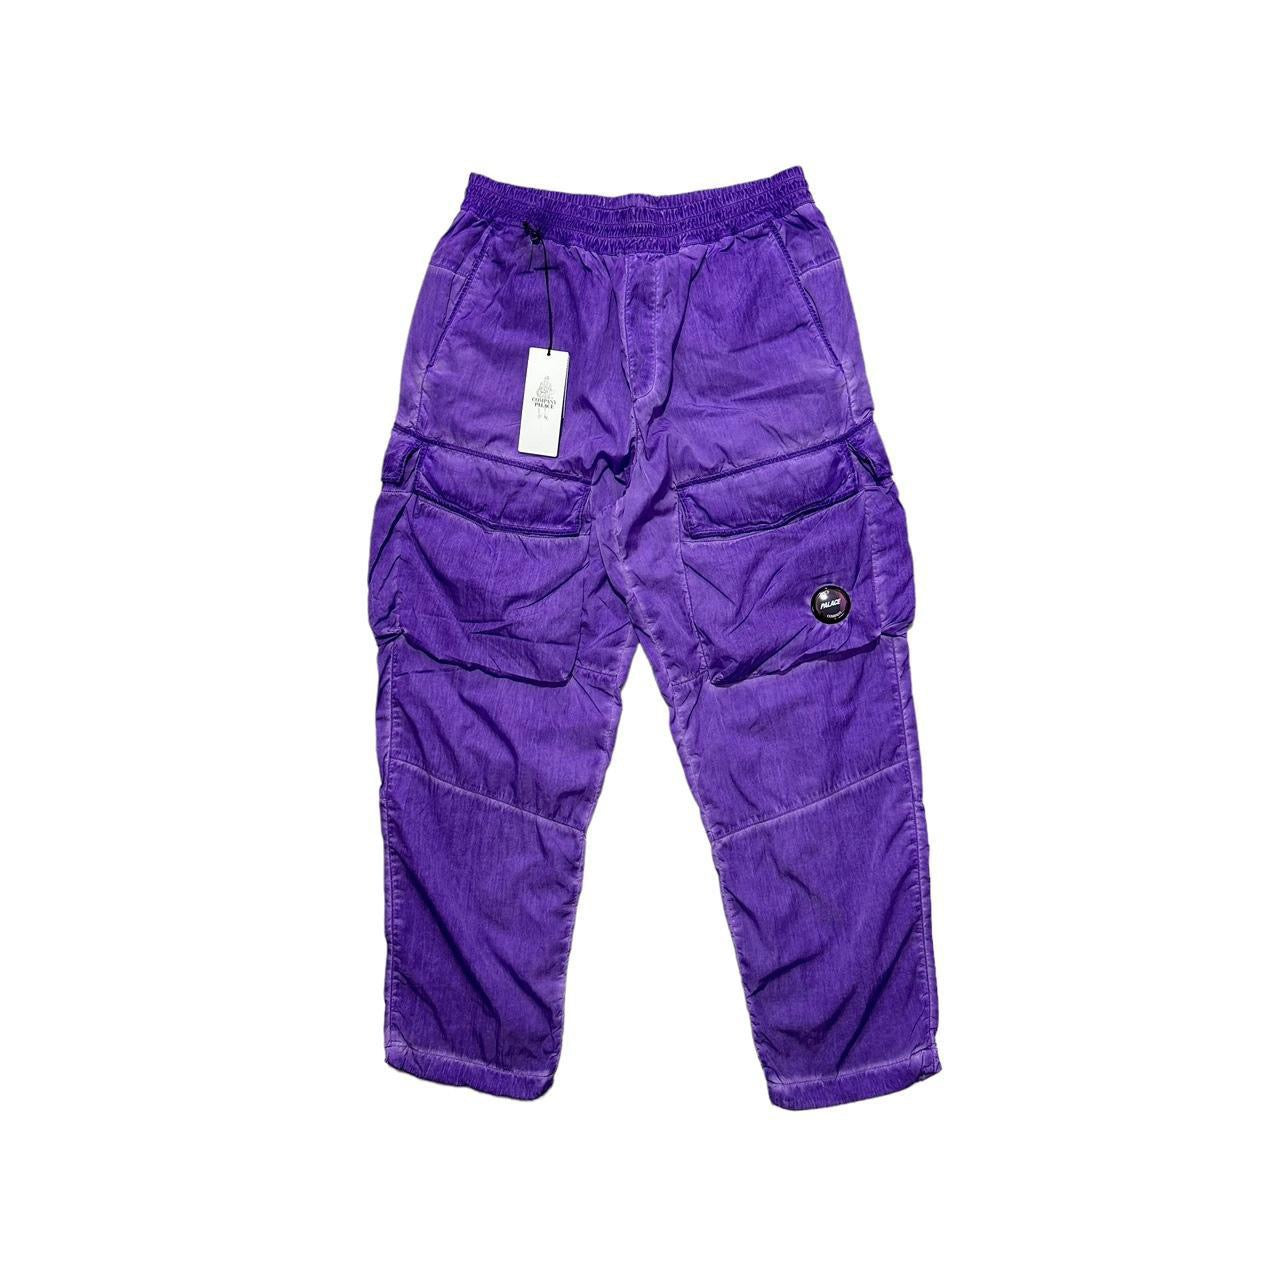 CP Company x Palace Shell Cargo Pants from Fall Winter 2022